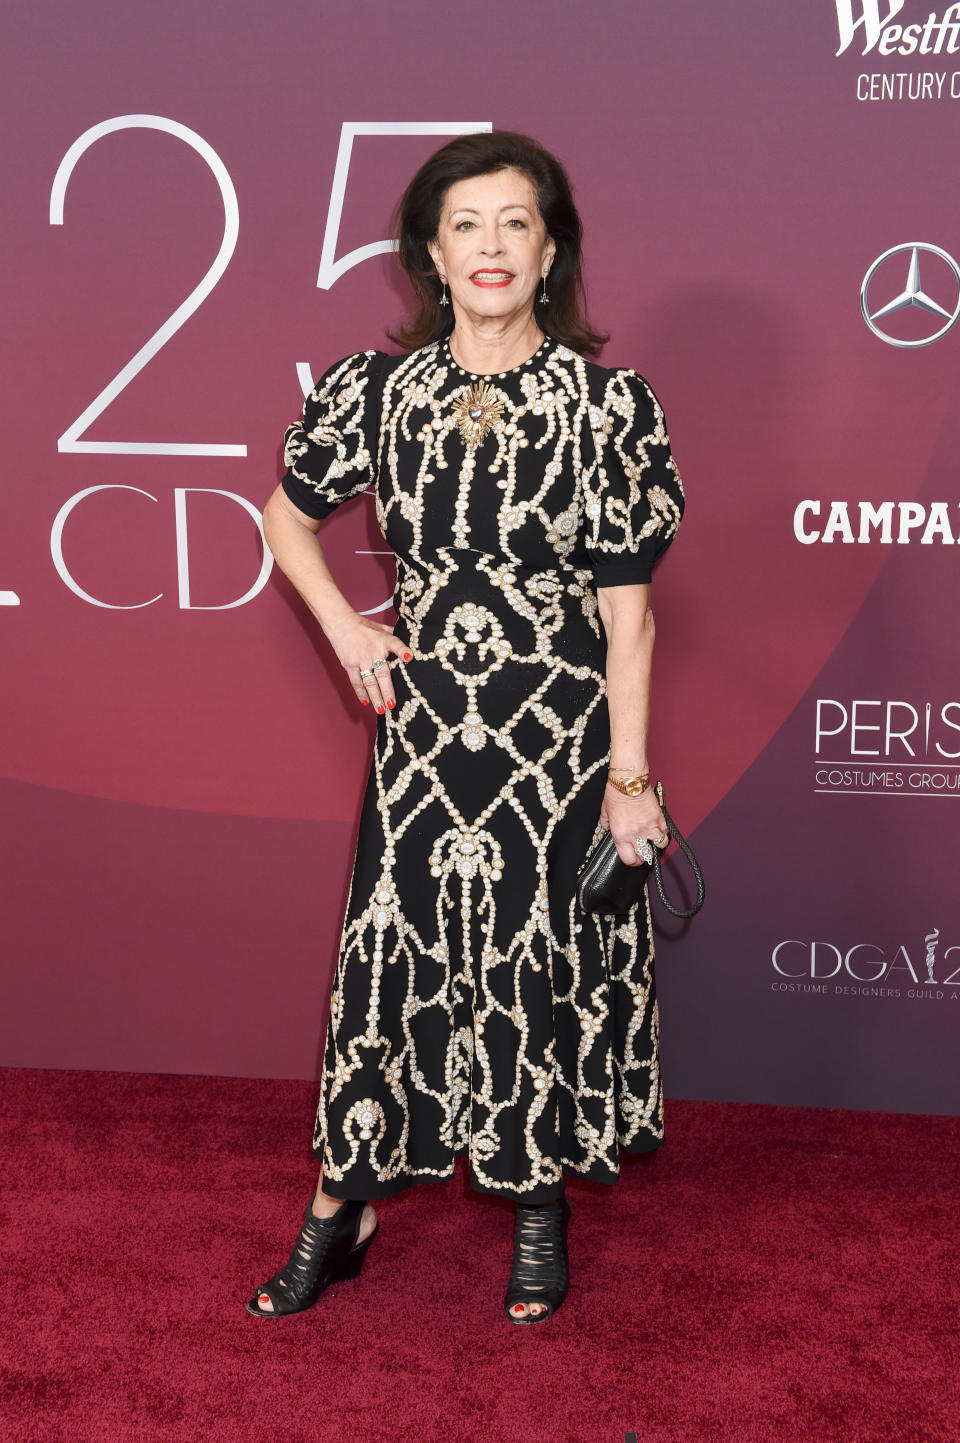 Jany Temime at the 25th Costume Designers Guild Awards held at the Fairmont Century Plaza on February 27, 2023 in Los Angeles, California.